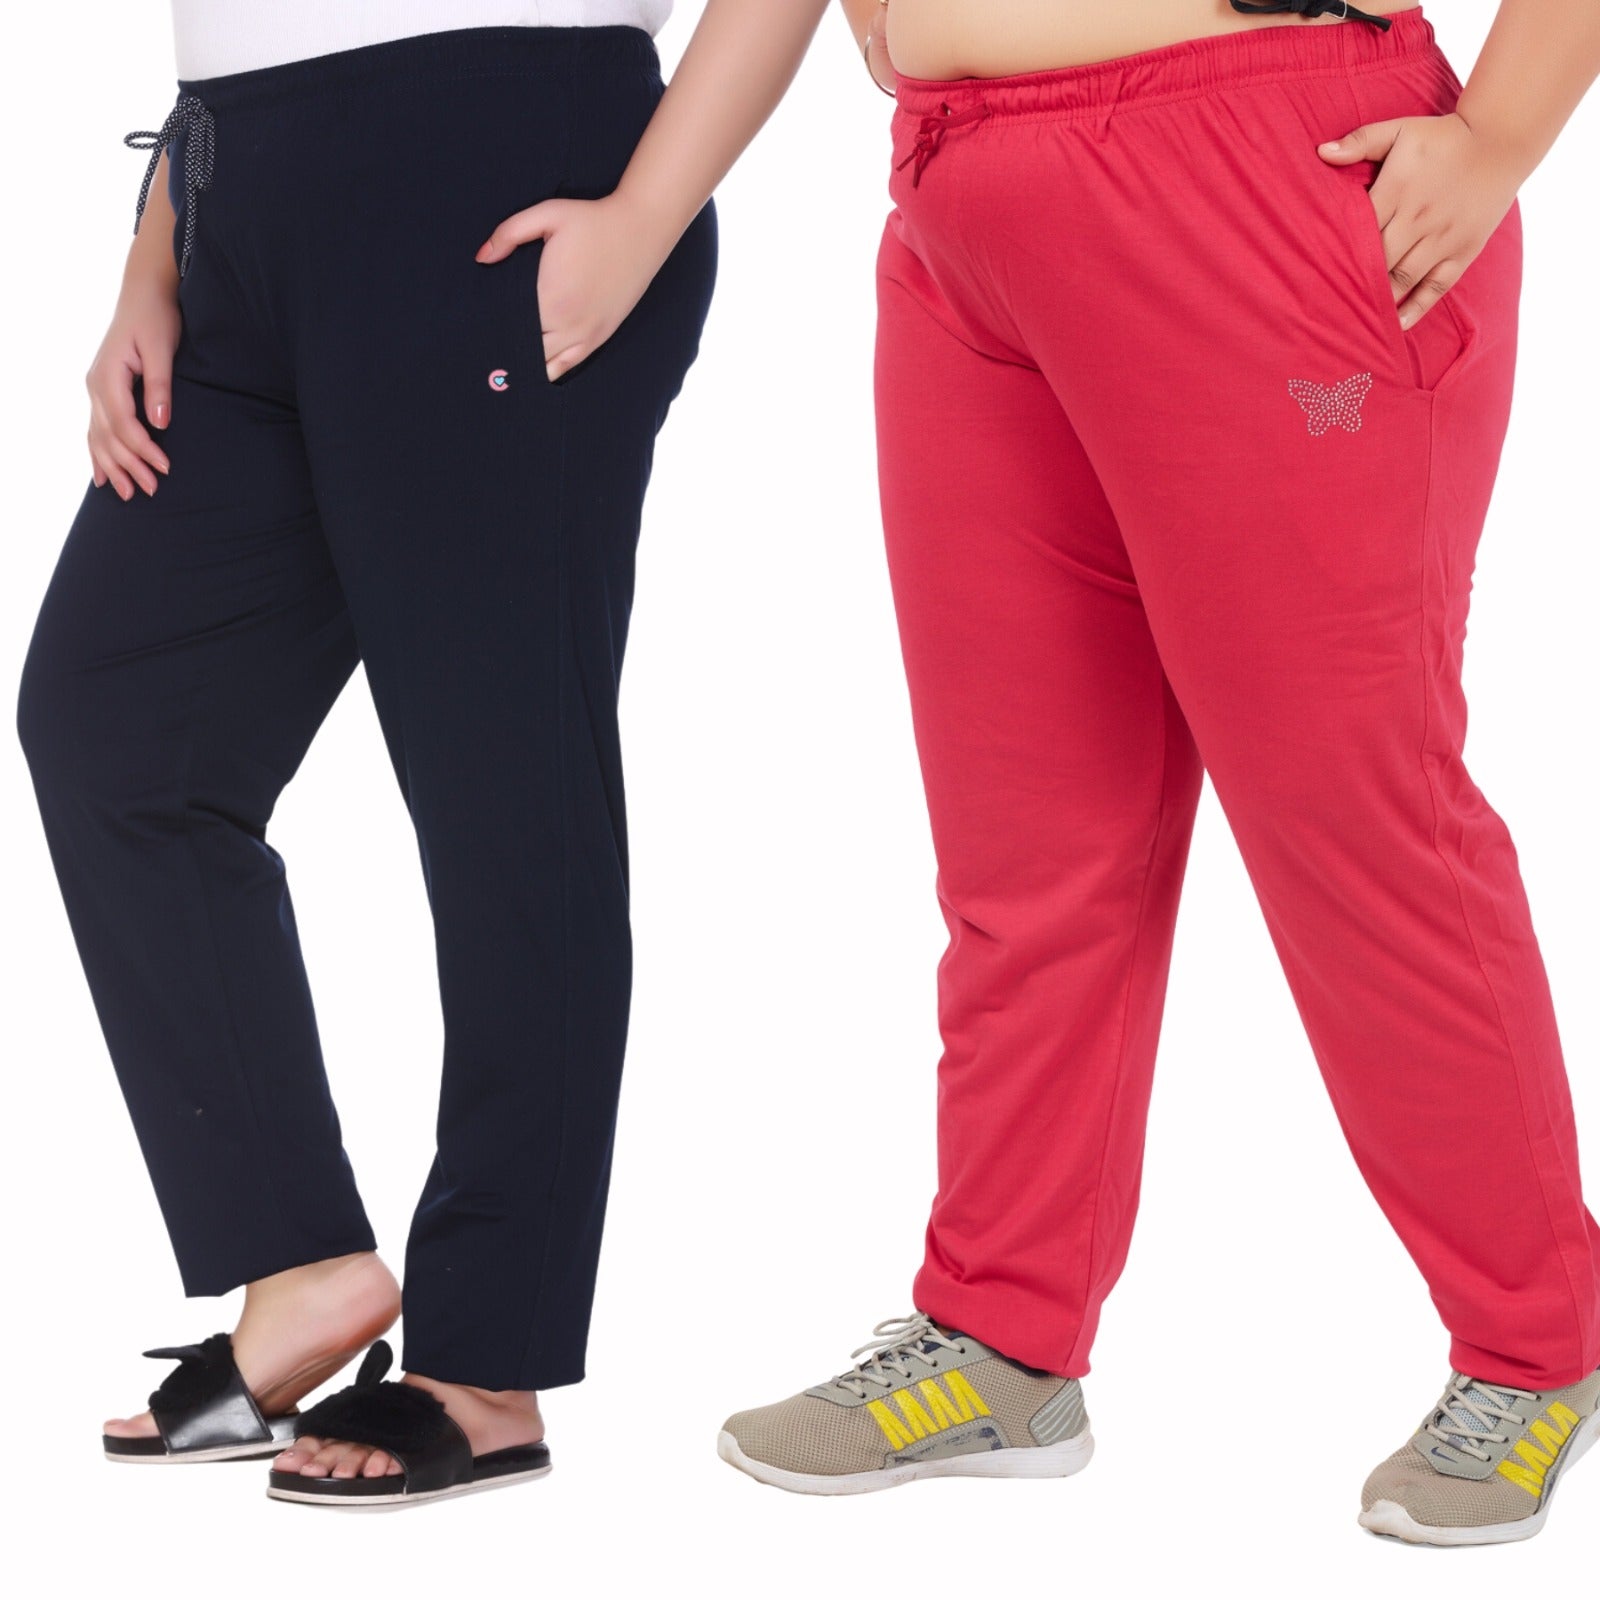 THE RANGE Ruched cotton-blend fleece track pants | THE OUTNET